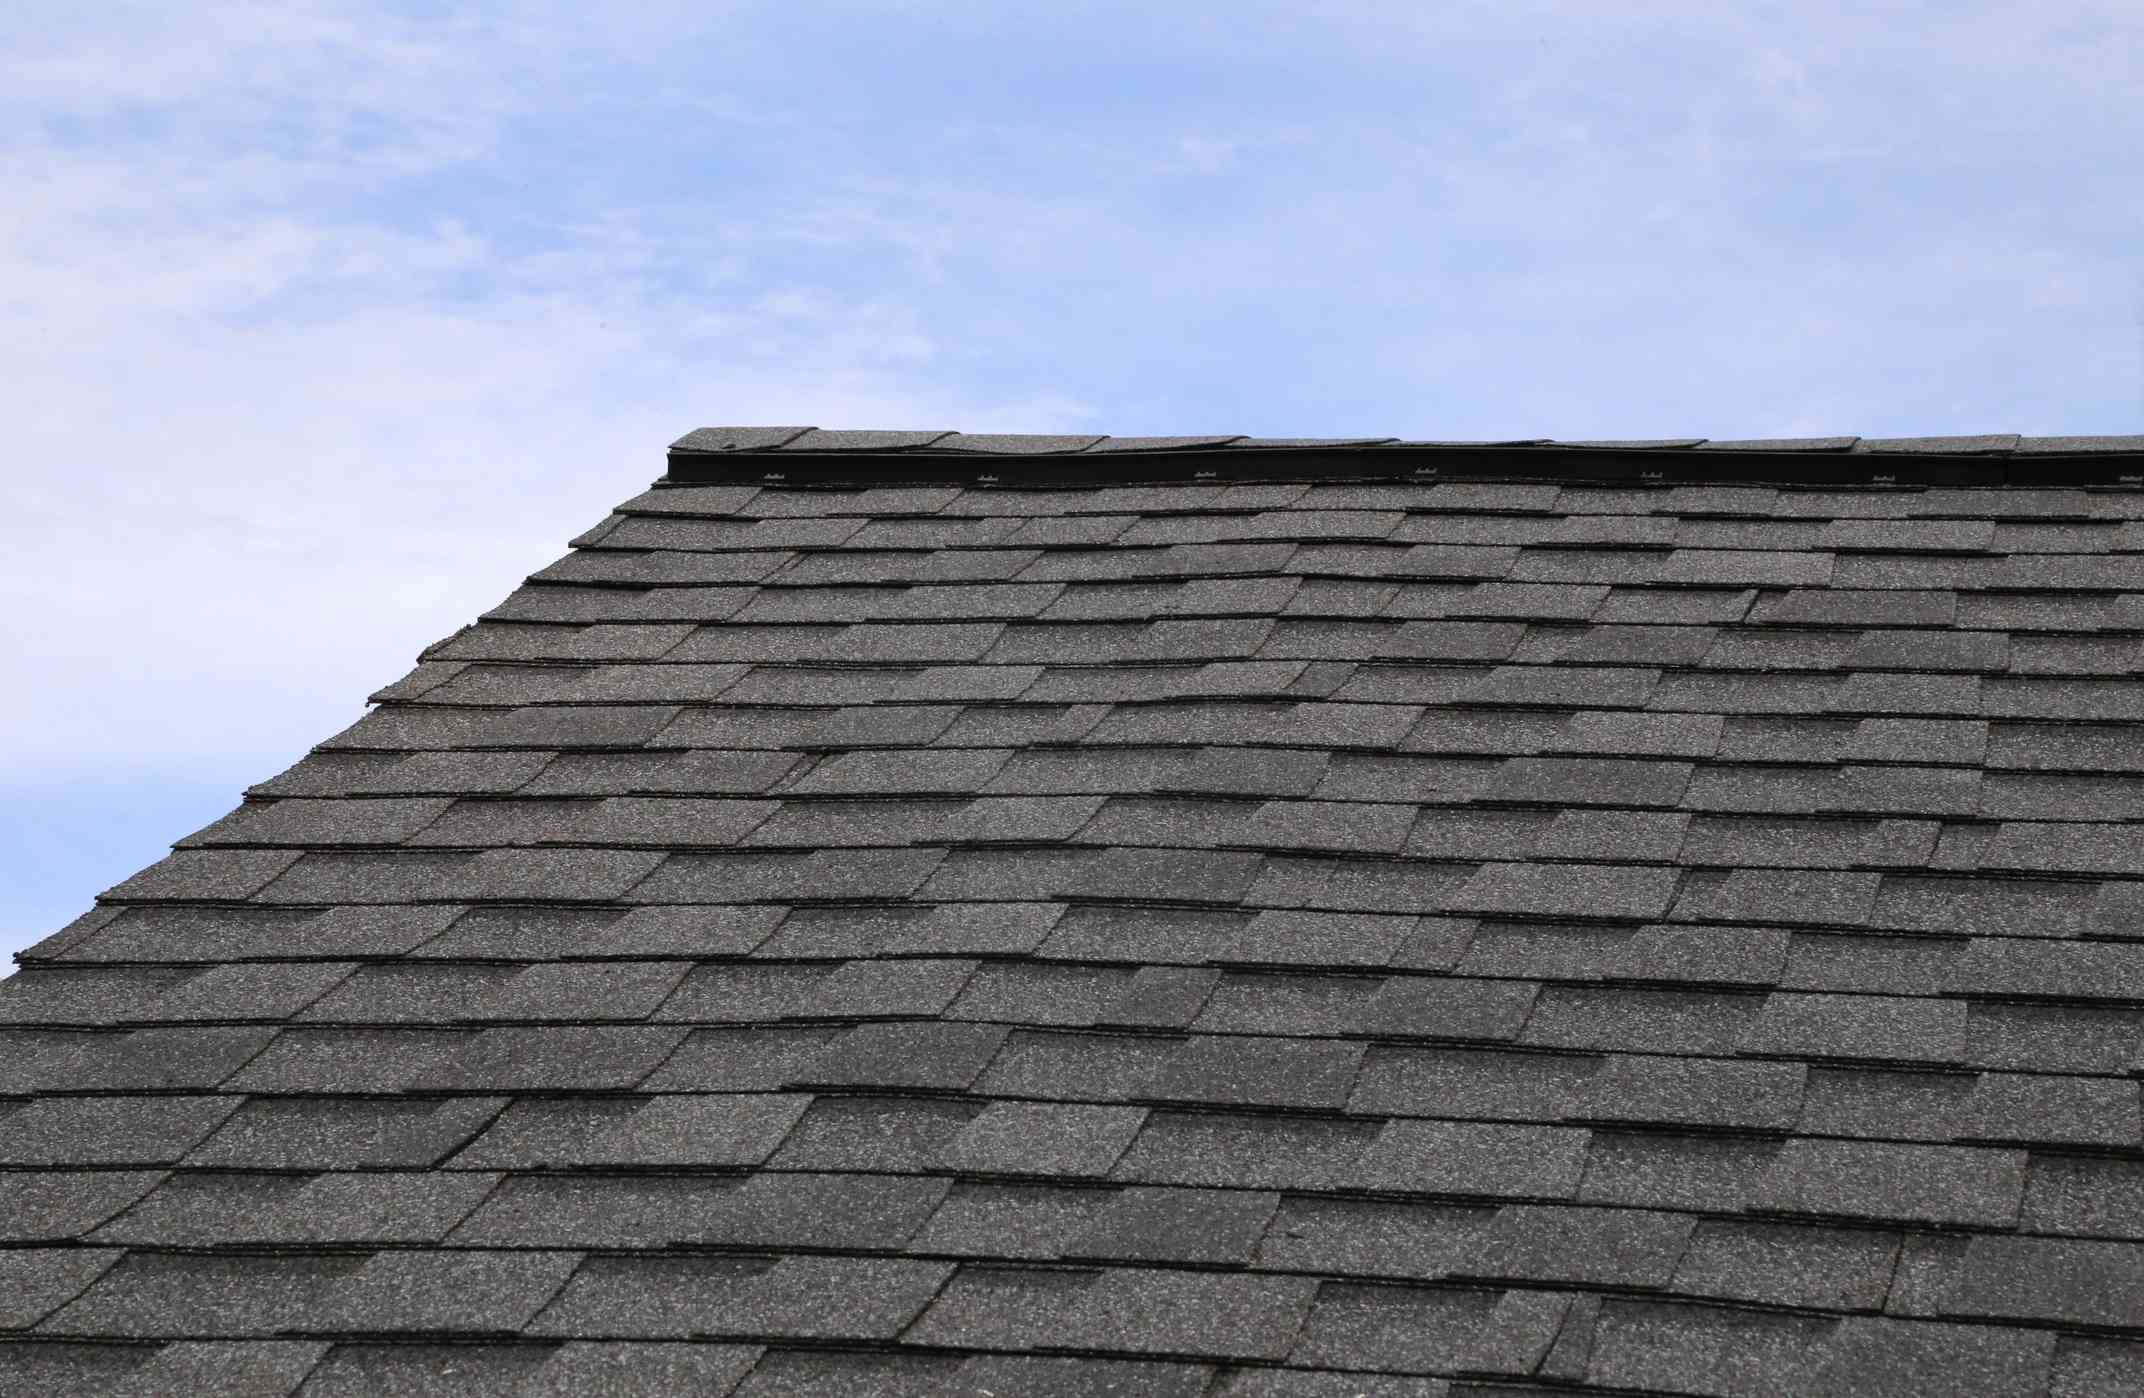 Things to Consider Before Putting a New Roof